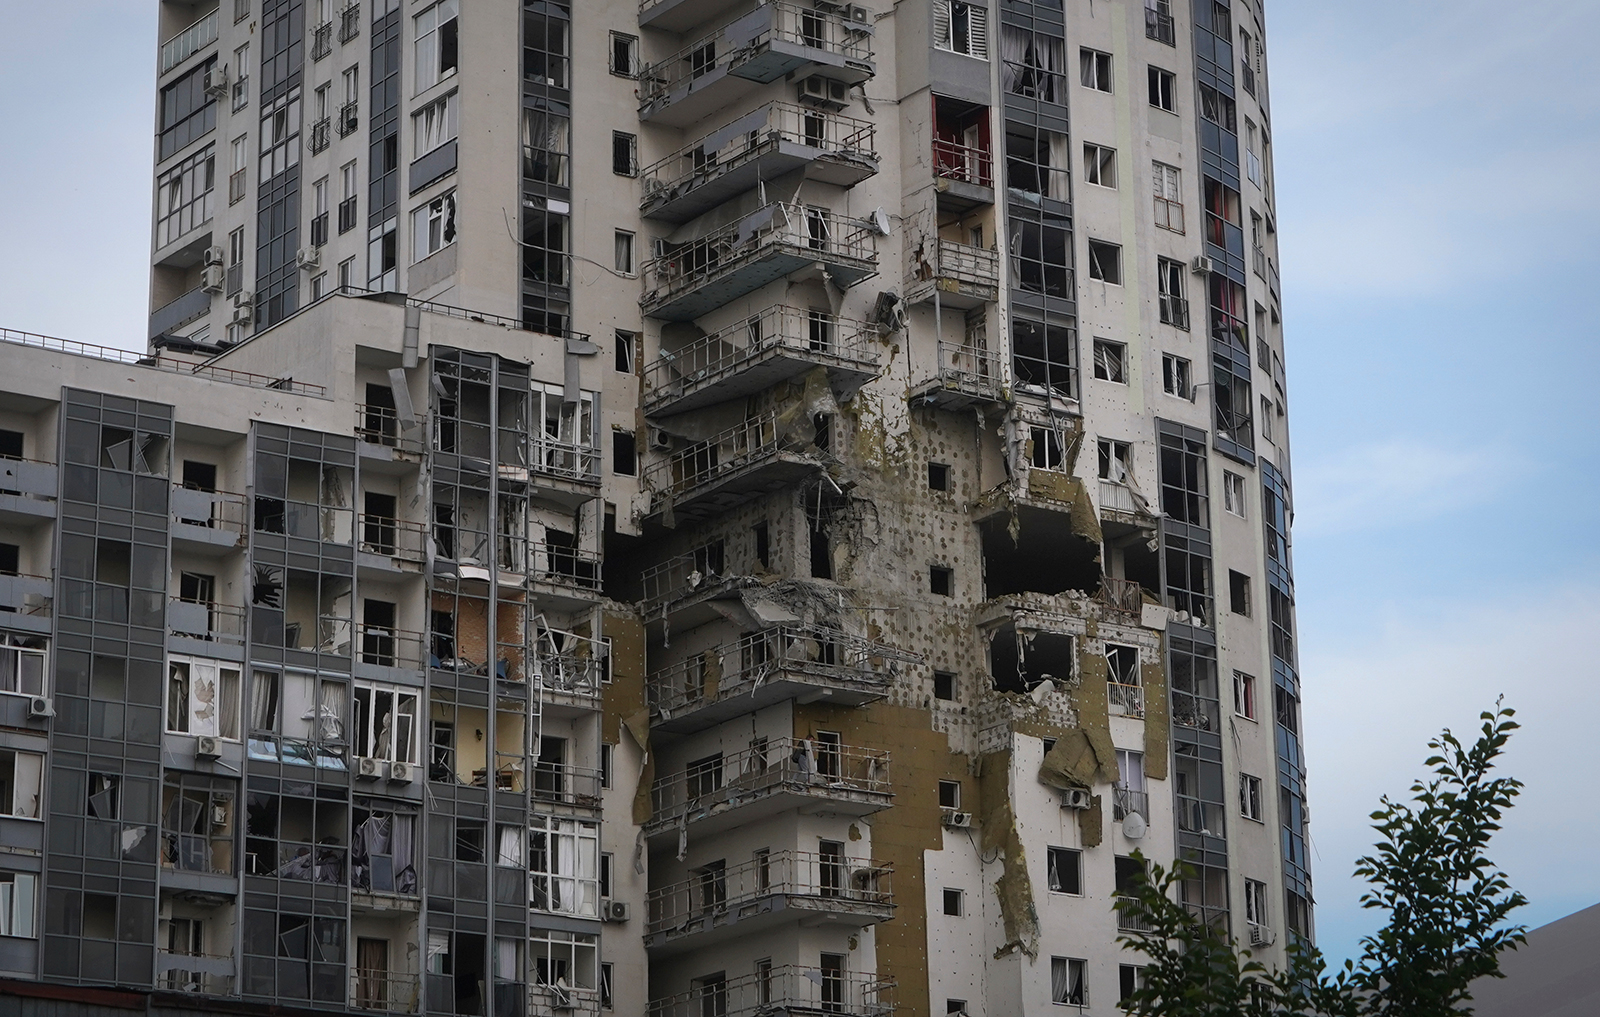 An apartment building damaged in the Russian missile attack in Kharkiv, Ukraine, on May 14.